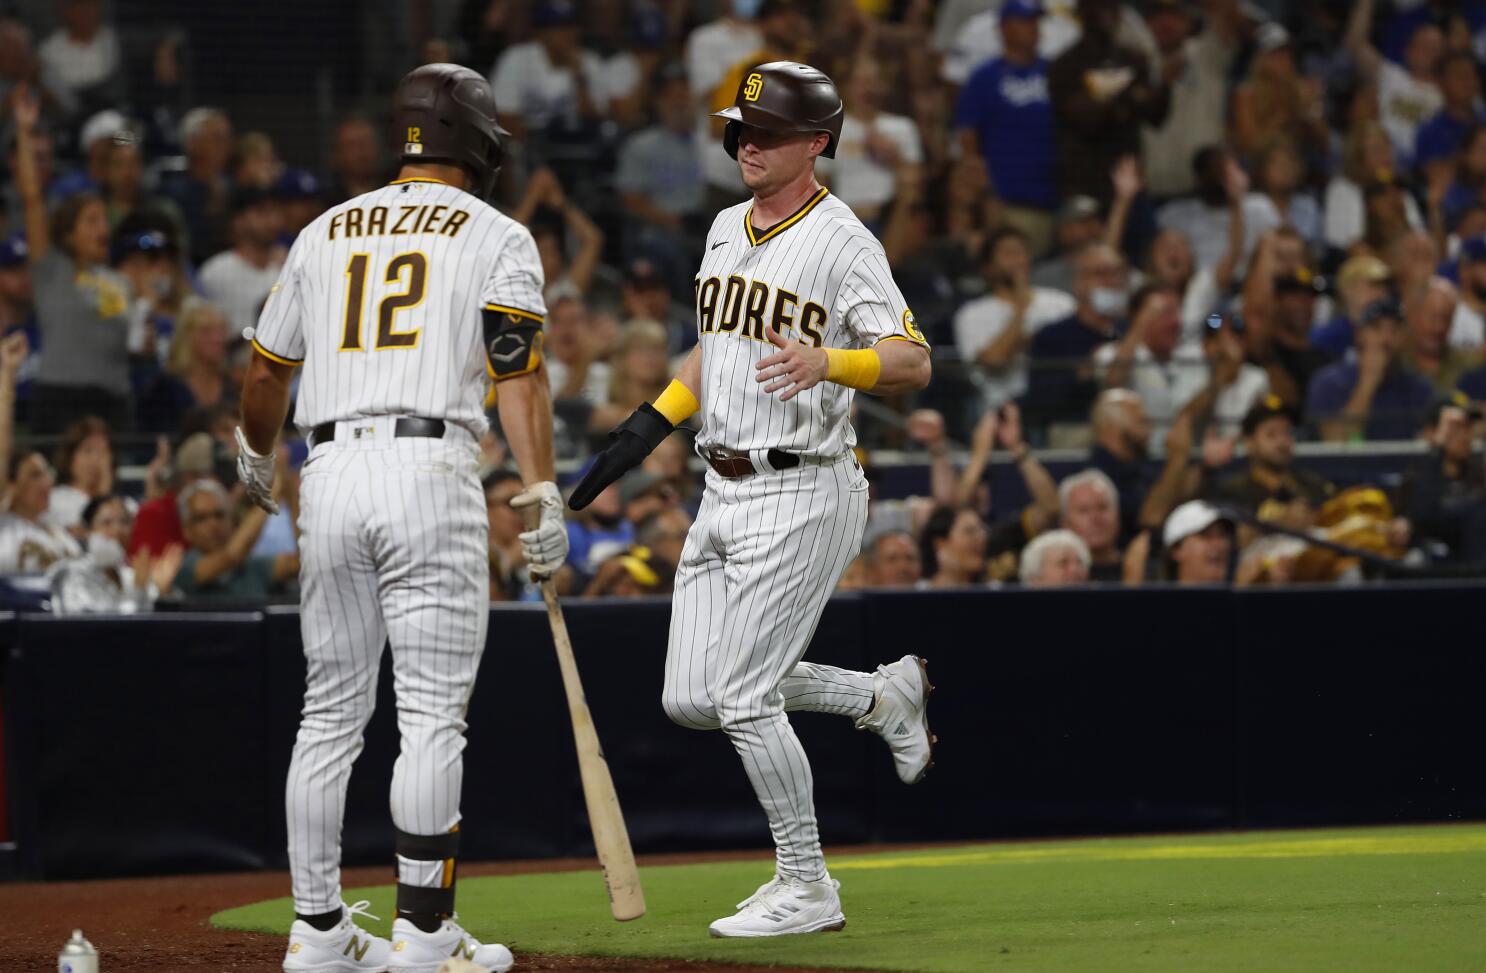 Jake Cronenworth - MLB First base - News, Stats, Bio and more - The Athletic